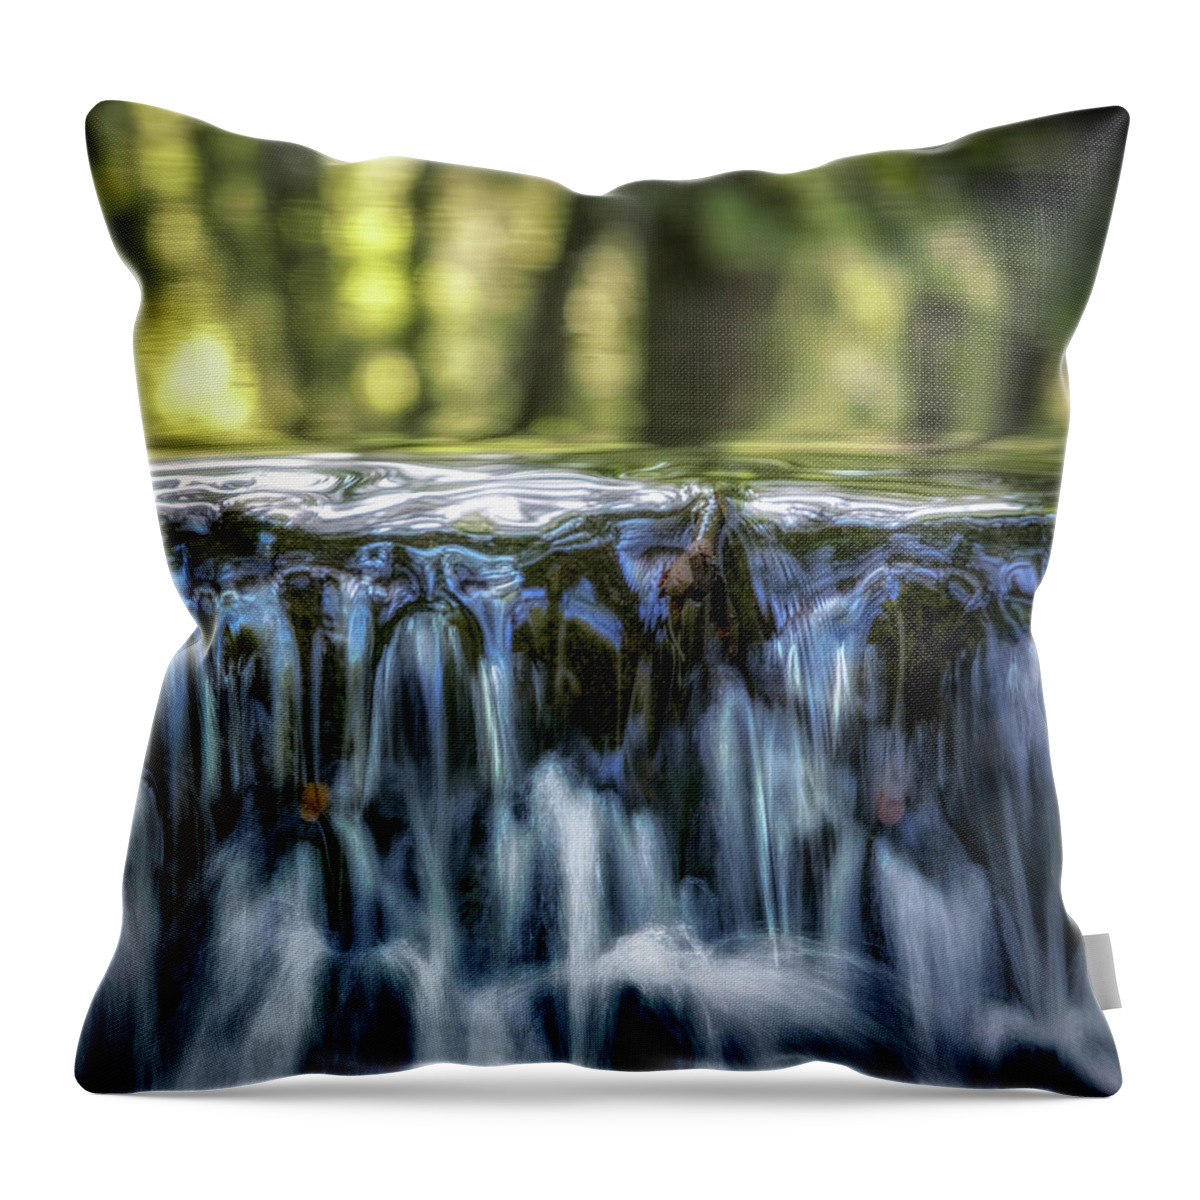 Soft Waterfall Throw Pillow featuring the photograph Soft waterfall by Donald Kinney